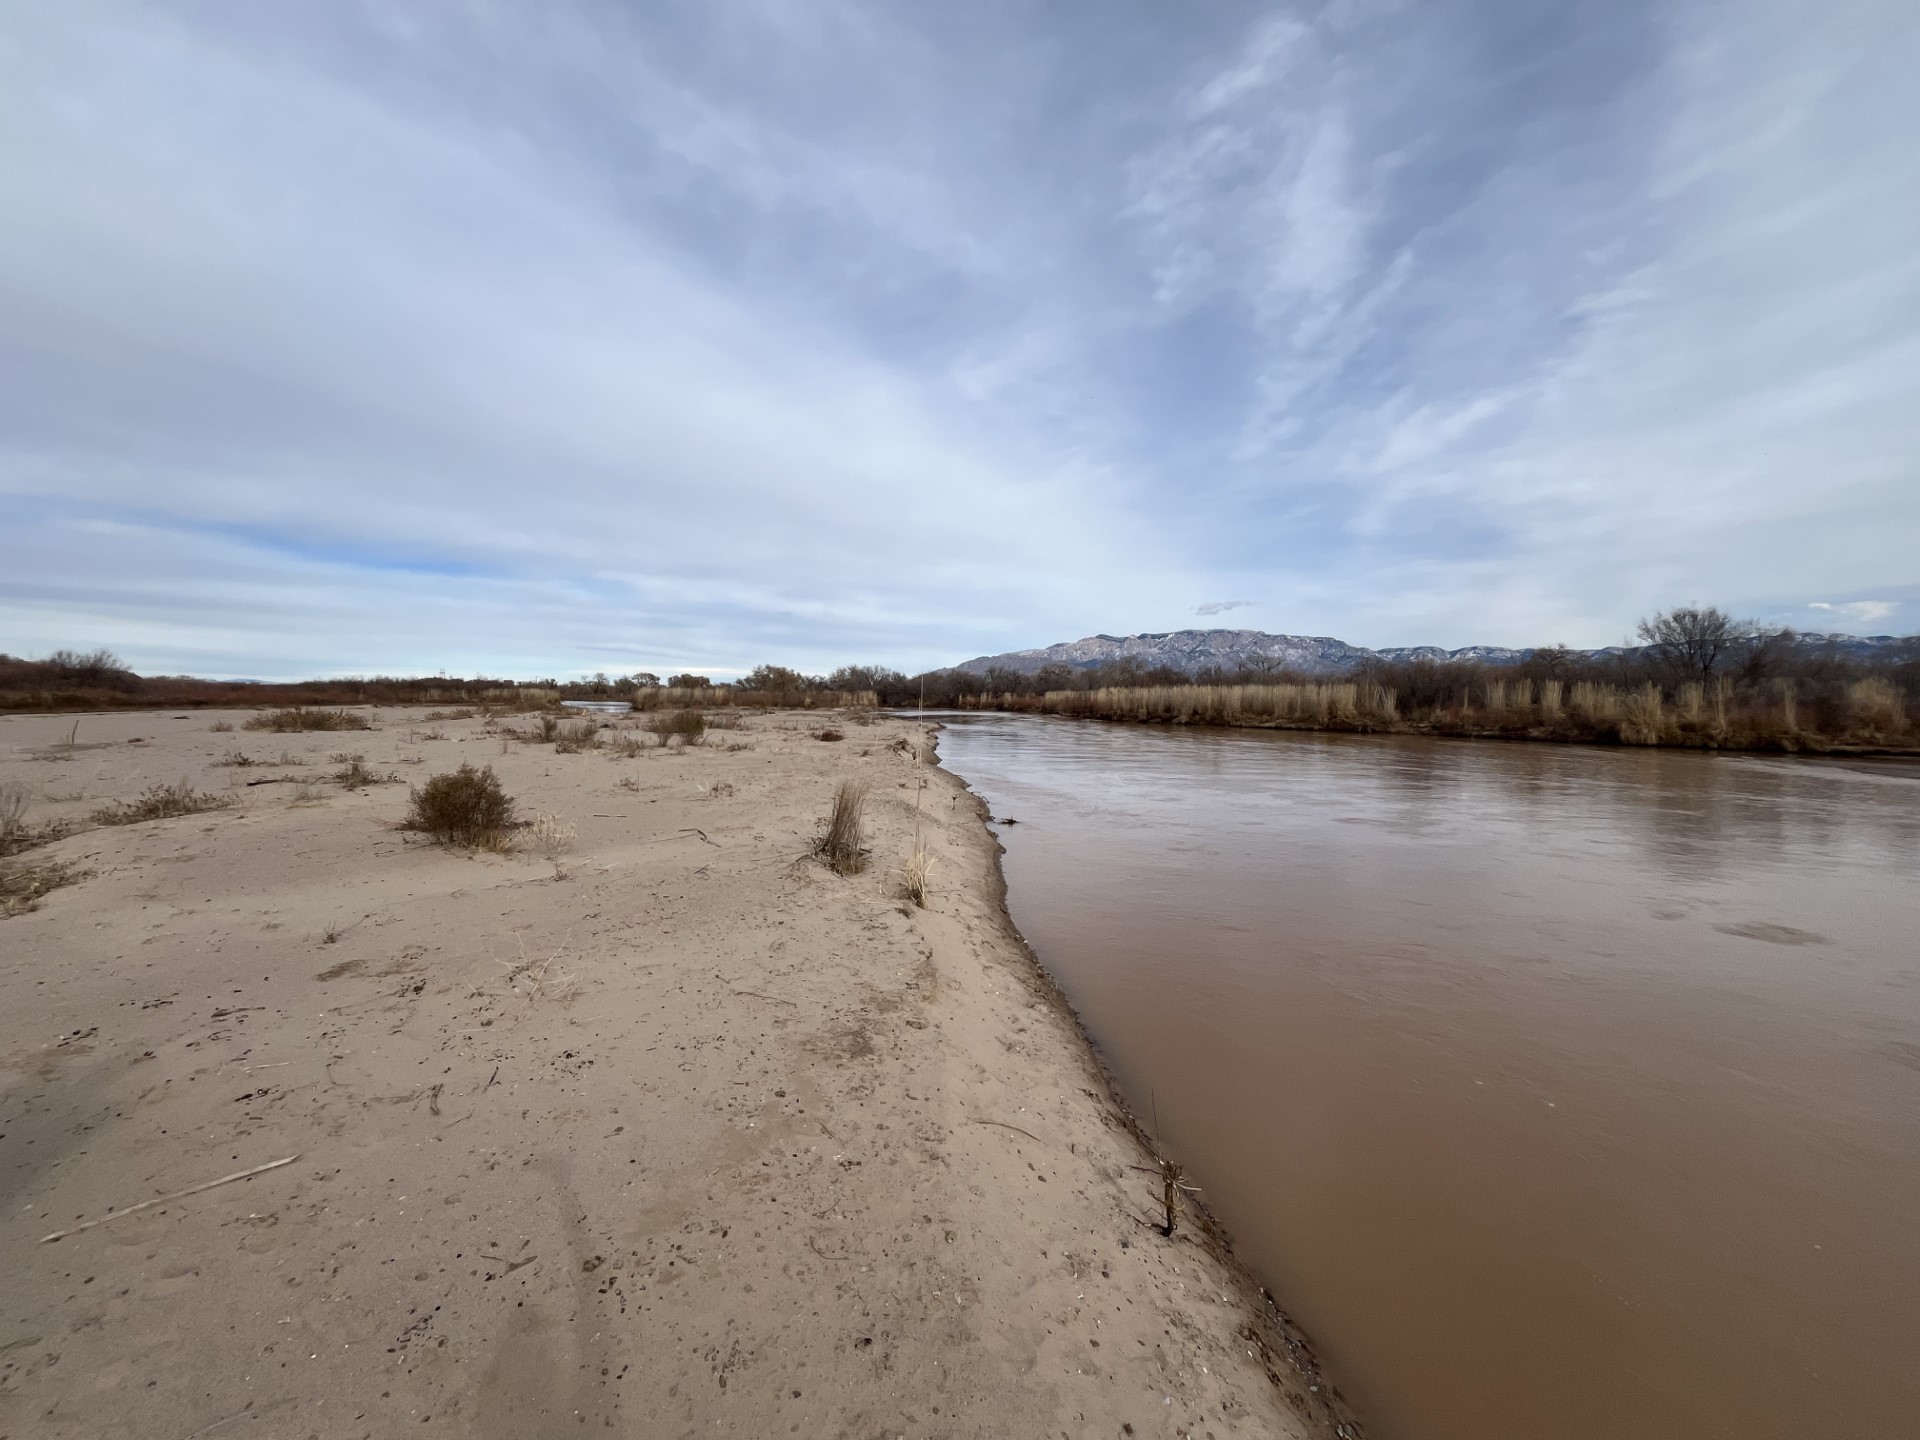 A view of a river in the desert with mountains in the background, featuring water.